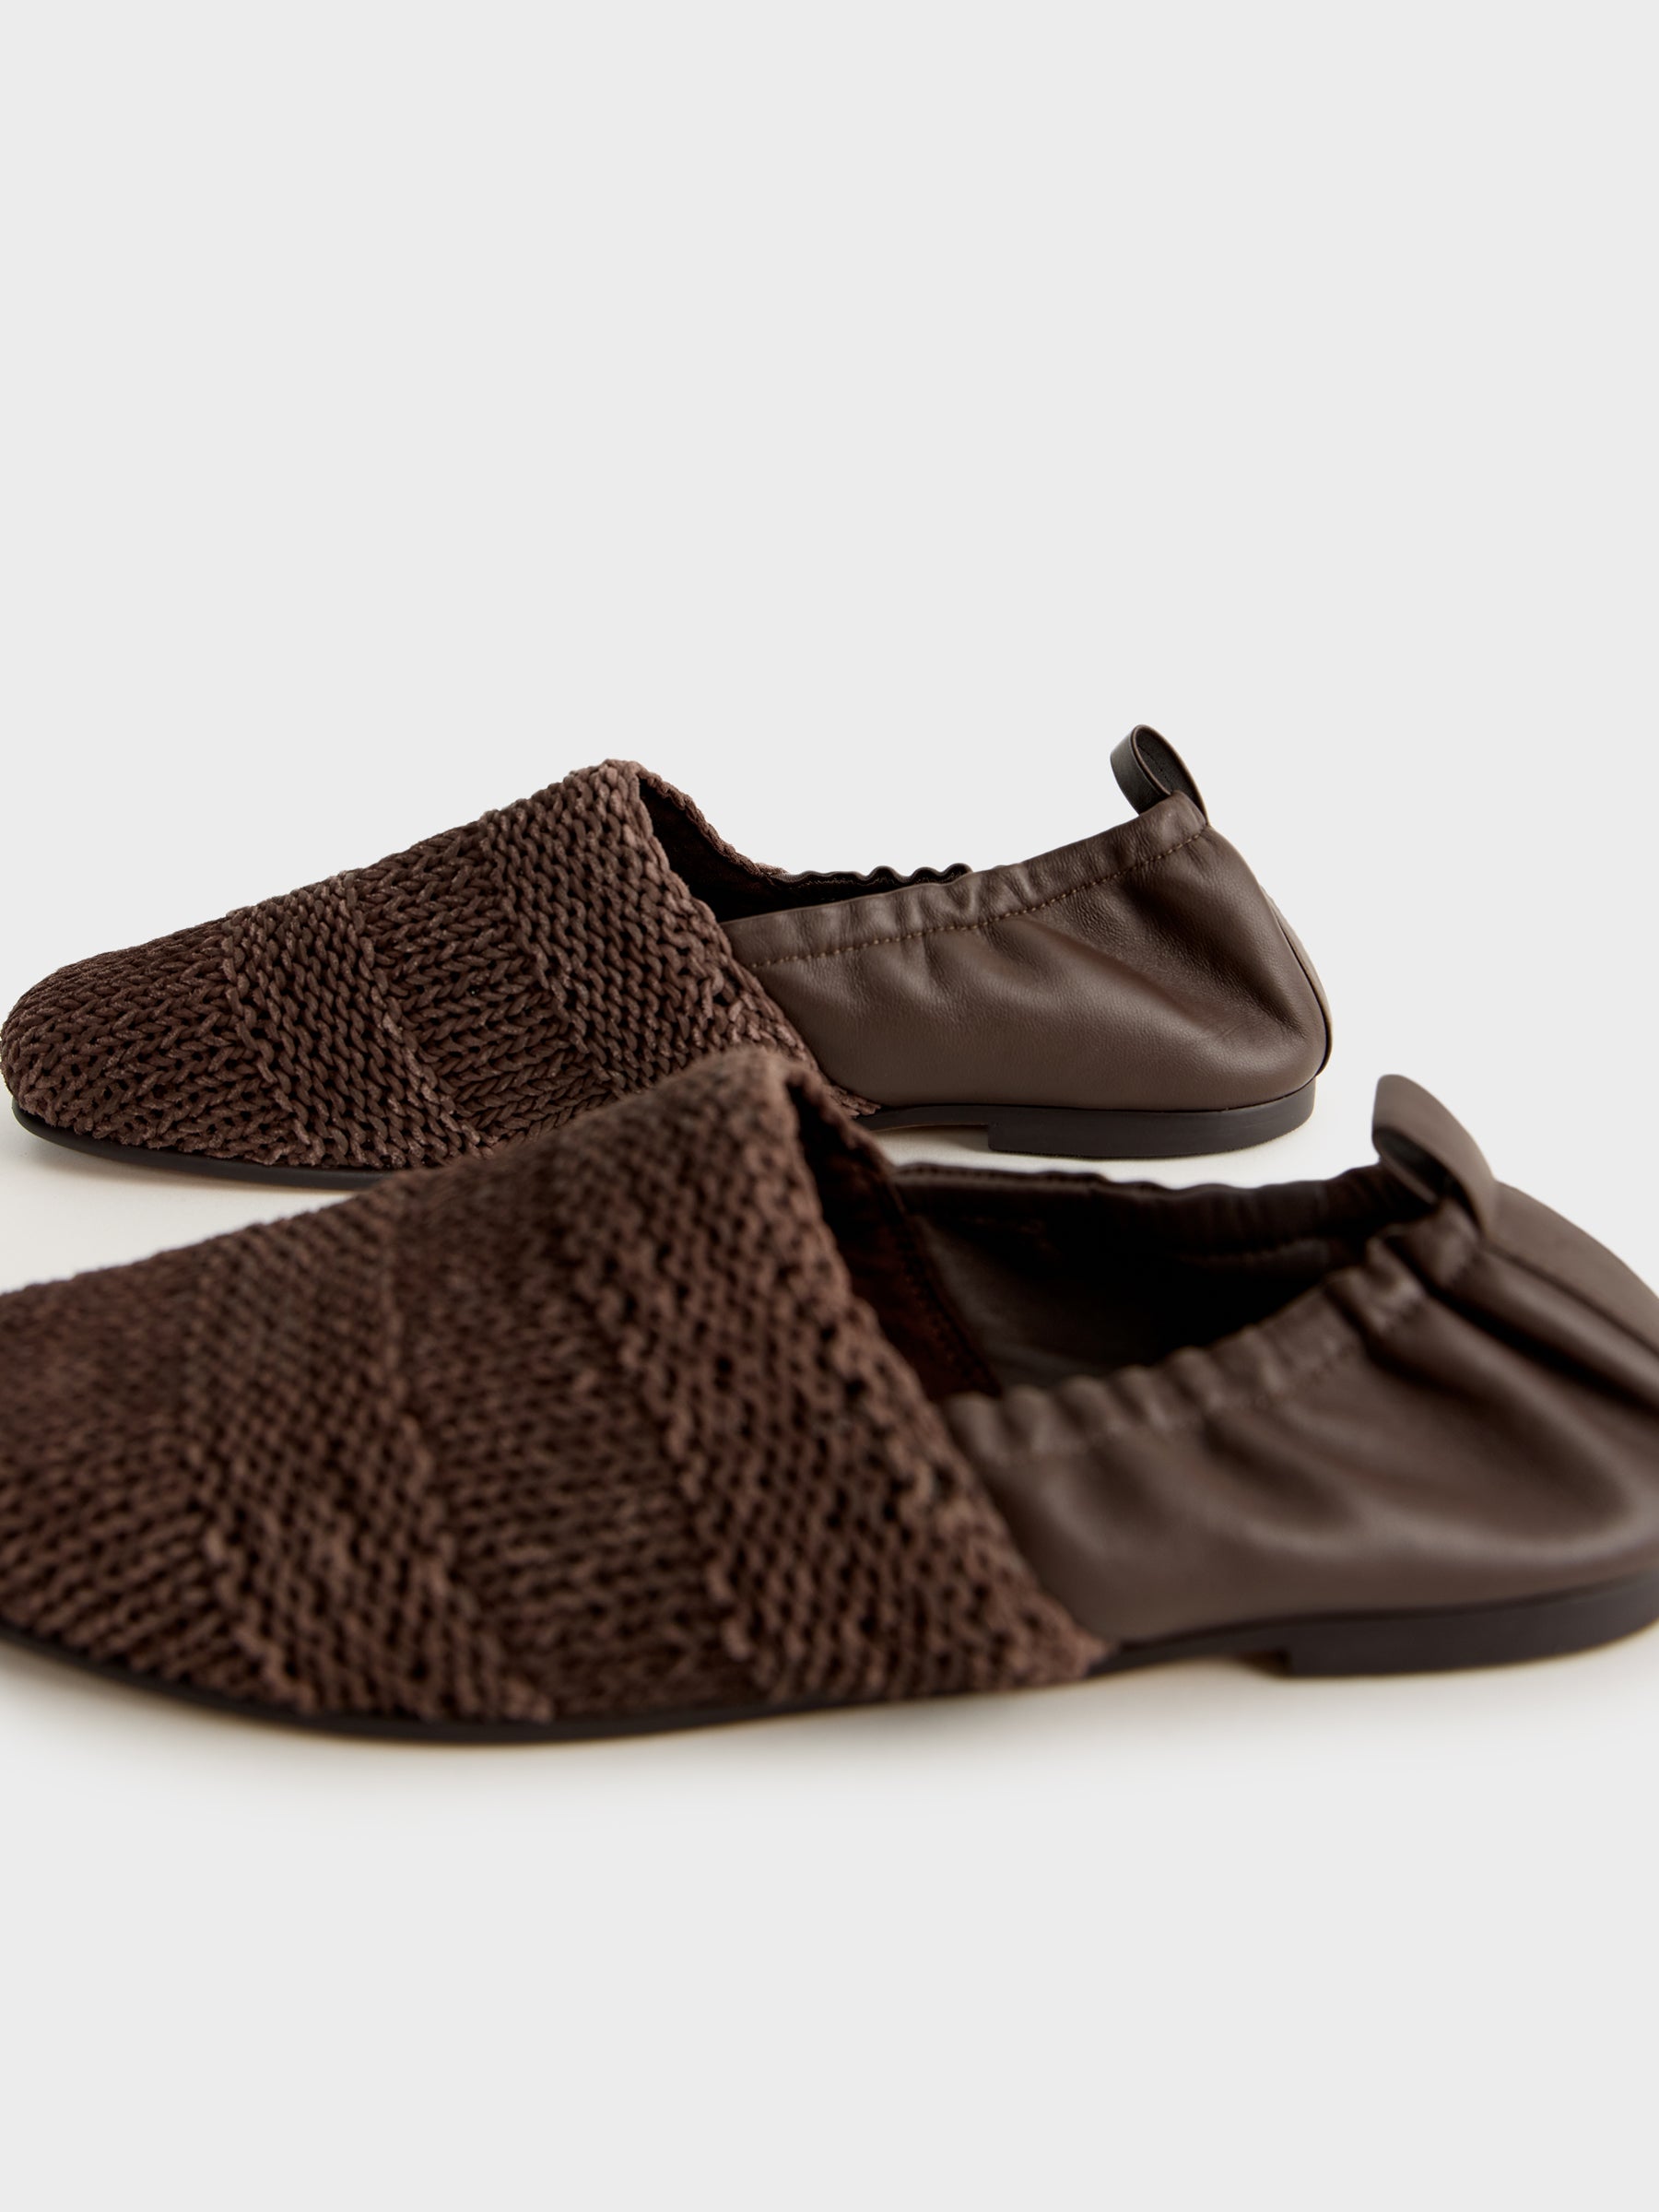 Woven leather loafers